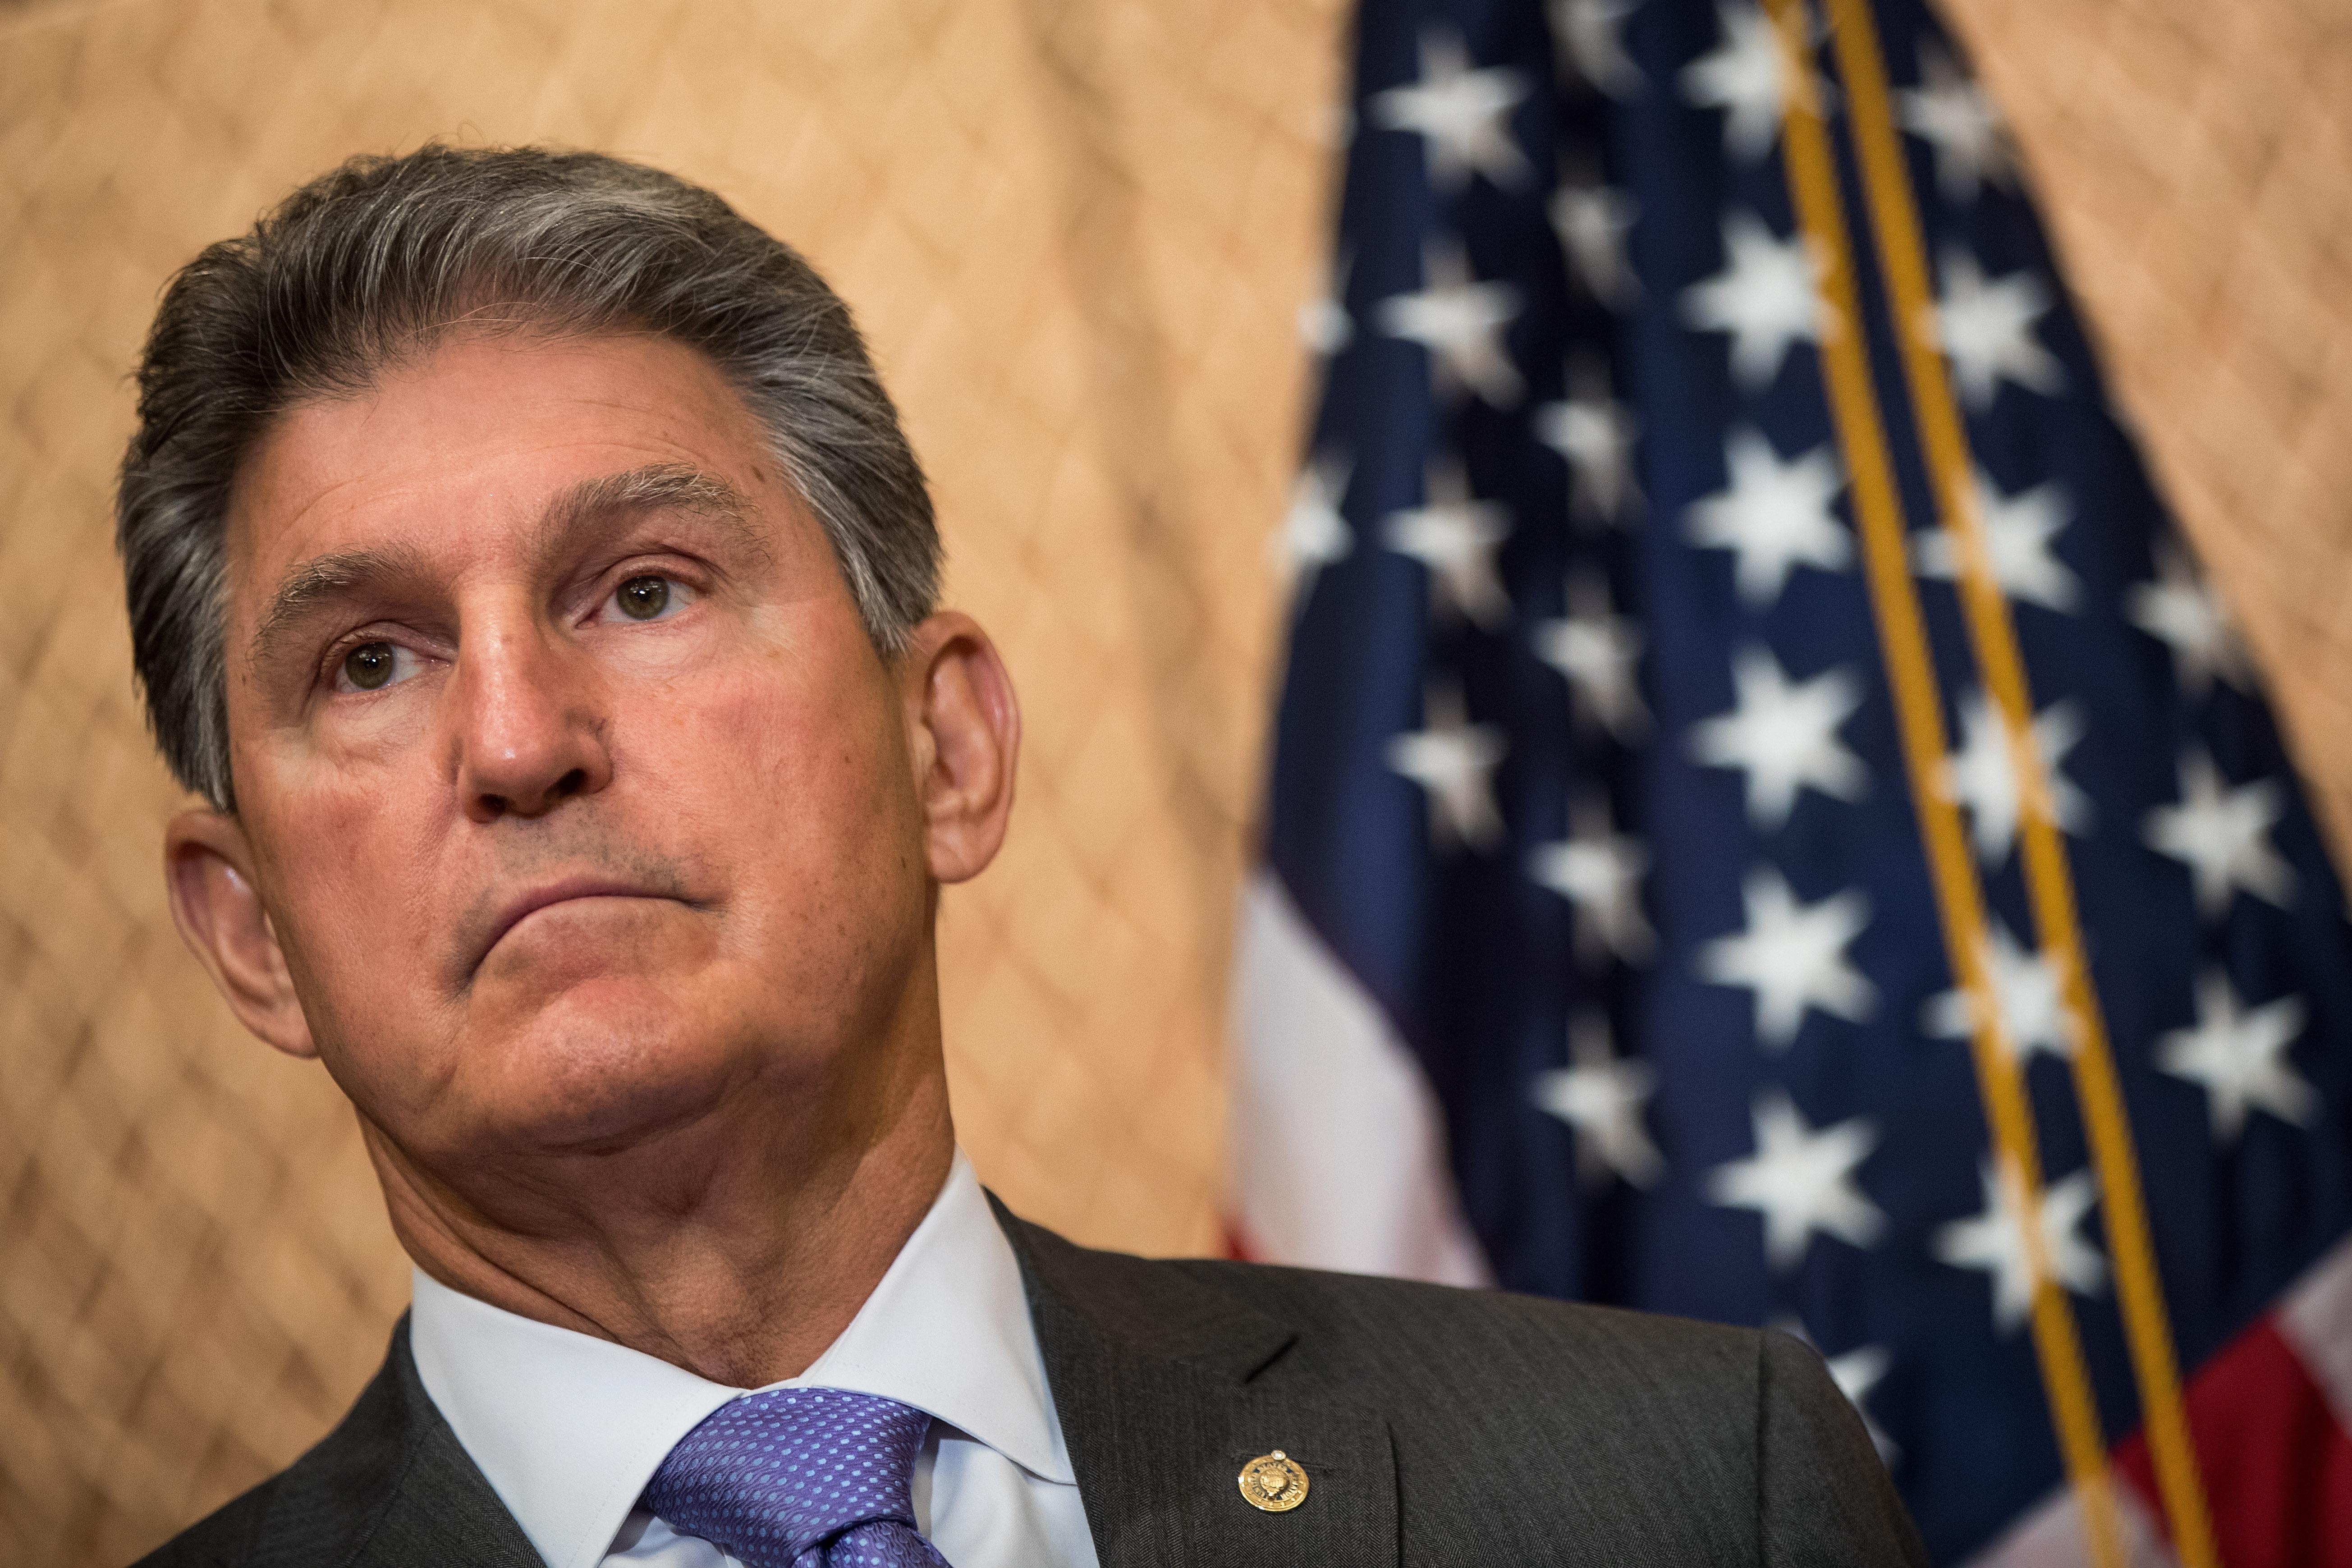 WASHINGTON, DC - JUNE 27:  U.S. Sen. Joe Manchin (D-WV) looks on during a news conference to discuss the national opioid crisis, on Capitol Hill June 27, 2017 in Washington, DC. The Democratic senators discussed the opioid issue and how it relates to the Senate health care bill being considered.  (Photo by Drew Angerer/Getty Images)